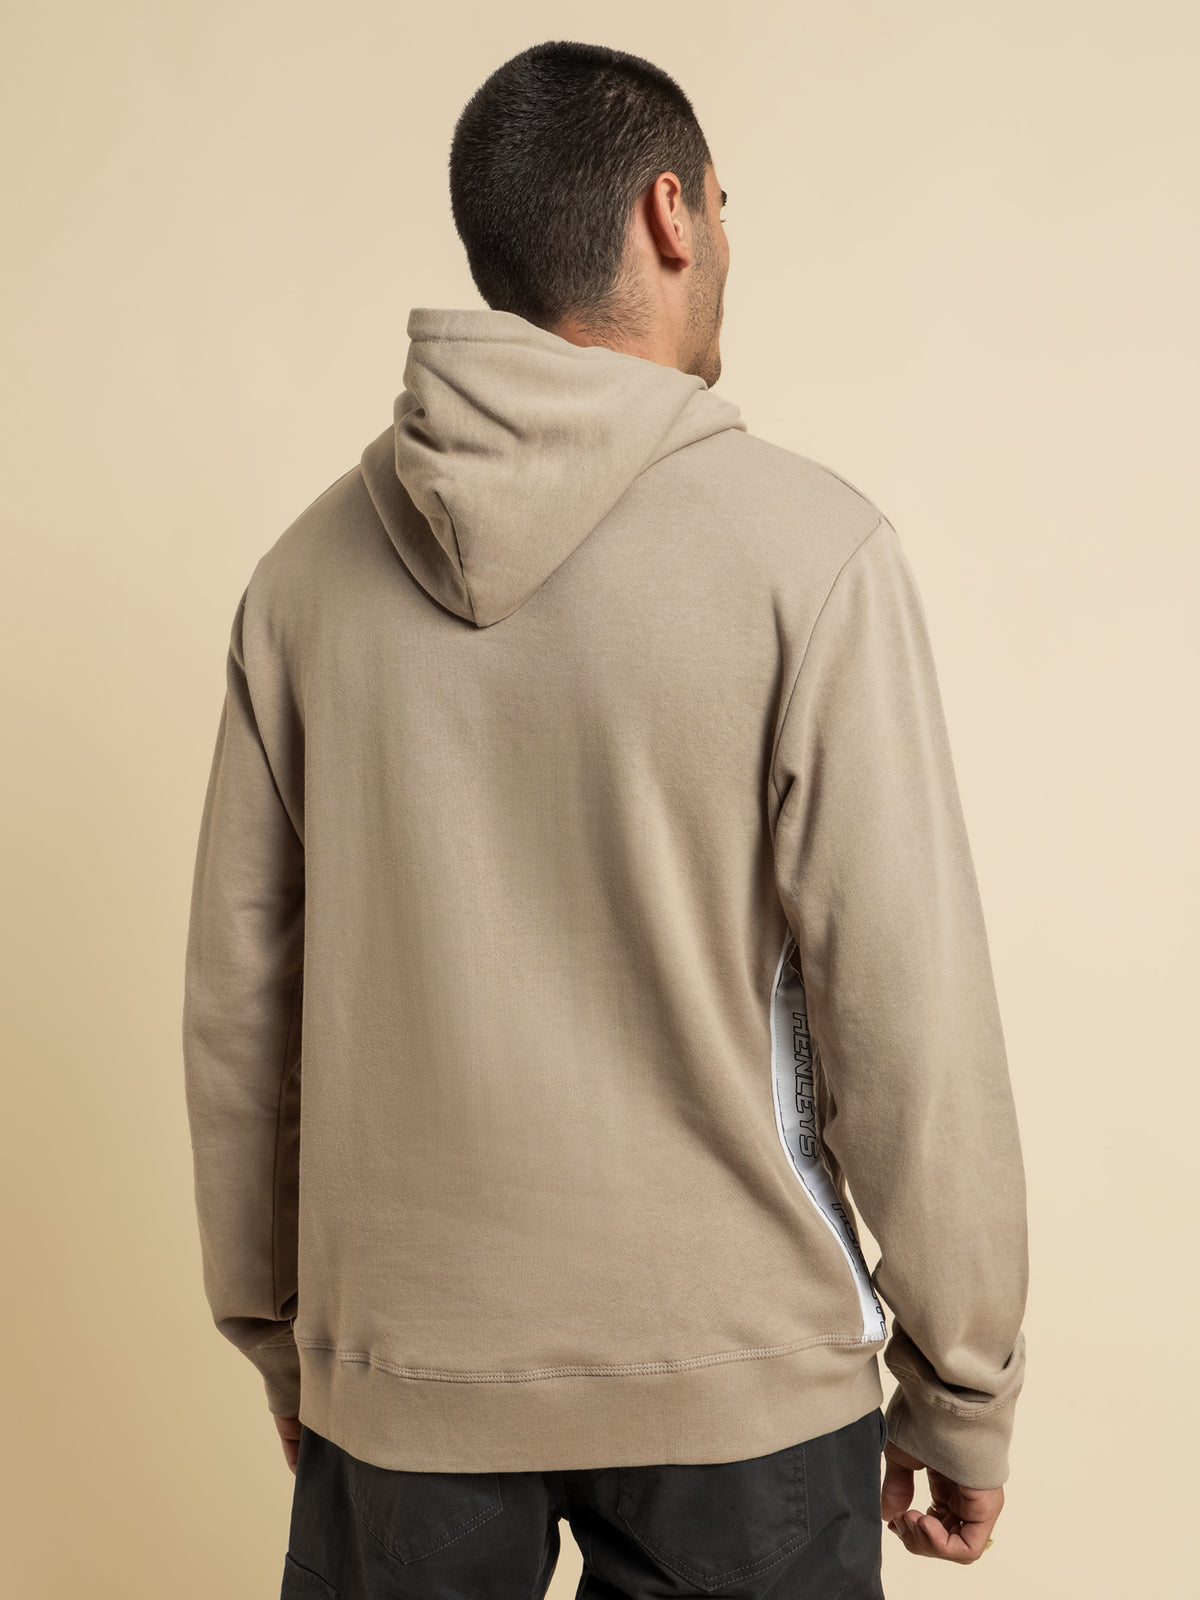 Dunstall Hooded Sweater in Ash